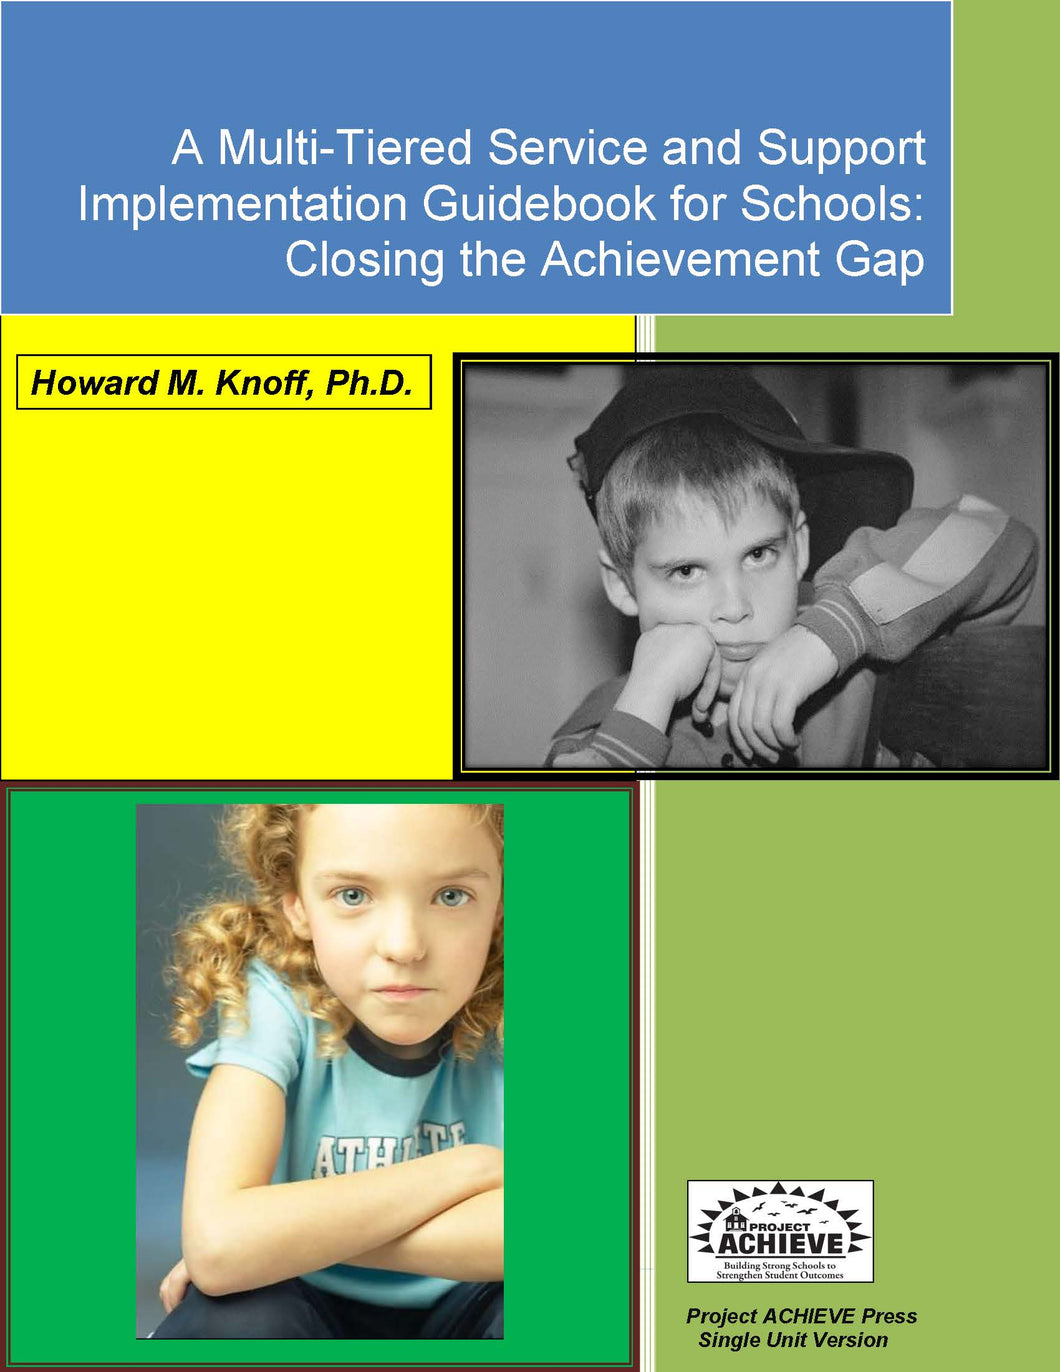 A Multi-Tiered Service and Support Implementation Guidebook for Schools: Closing the Achievement Gap